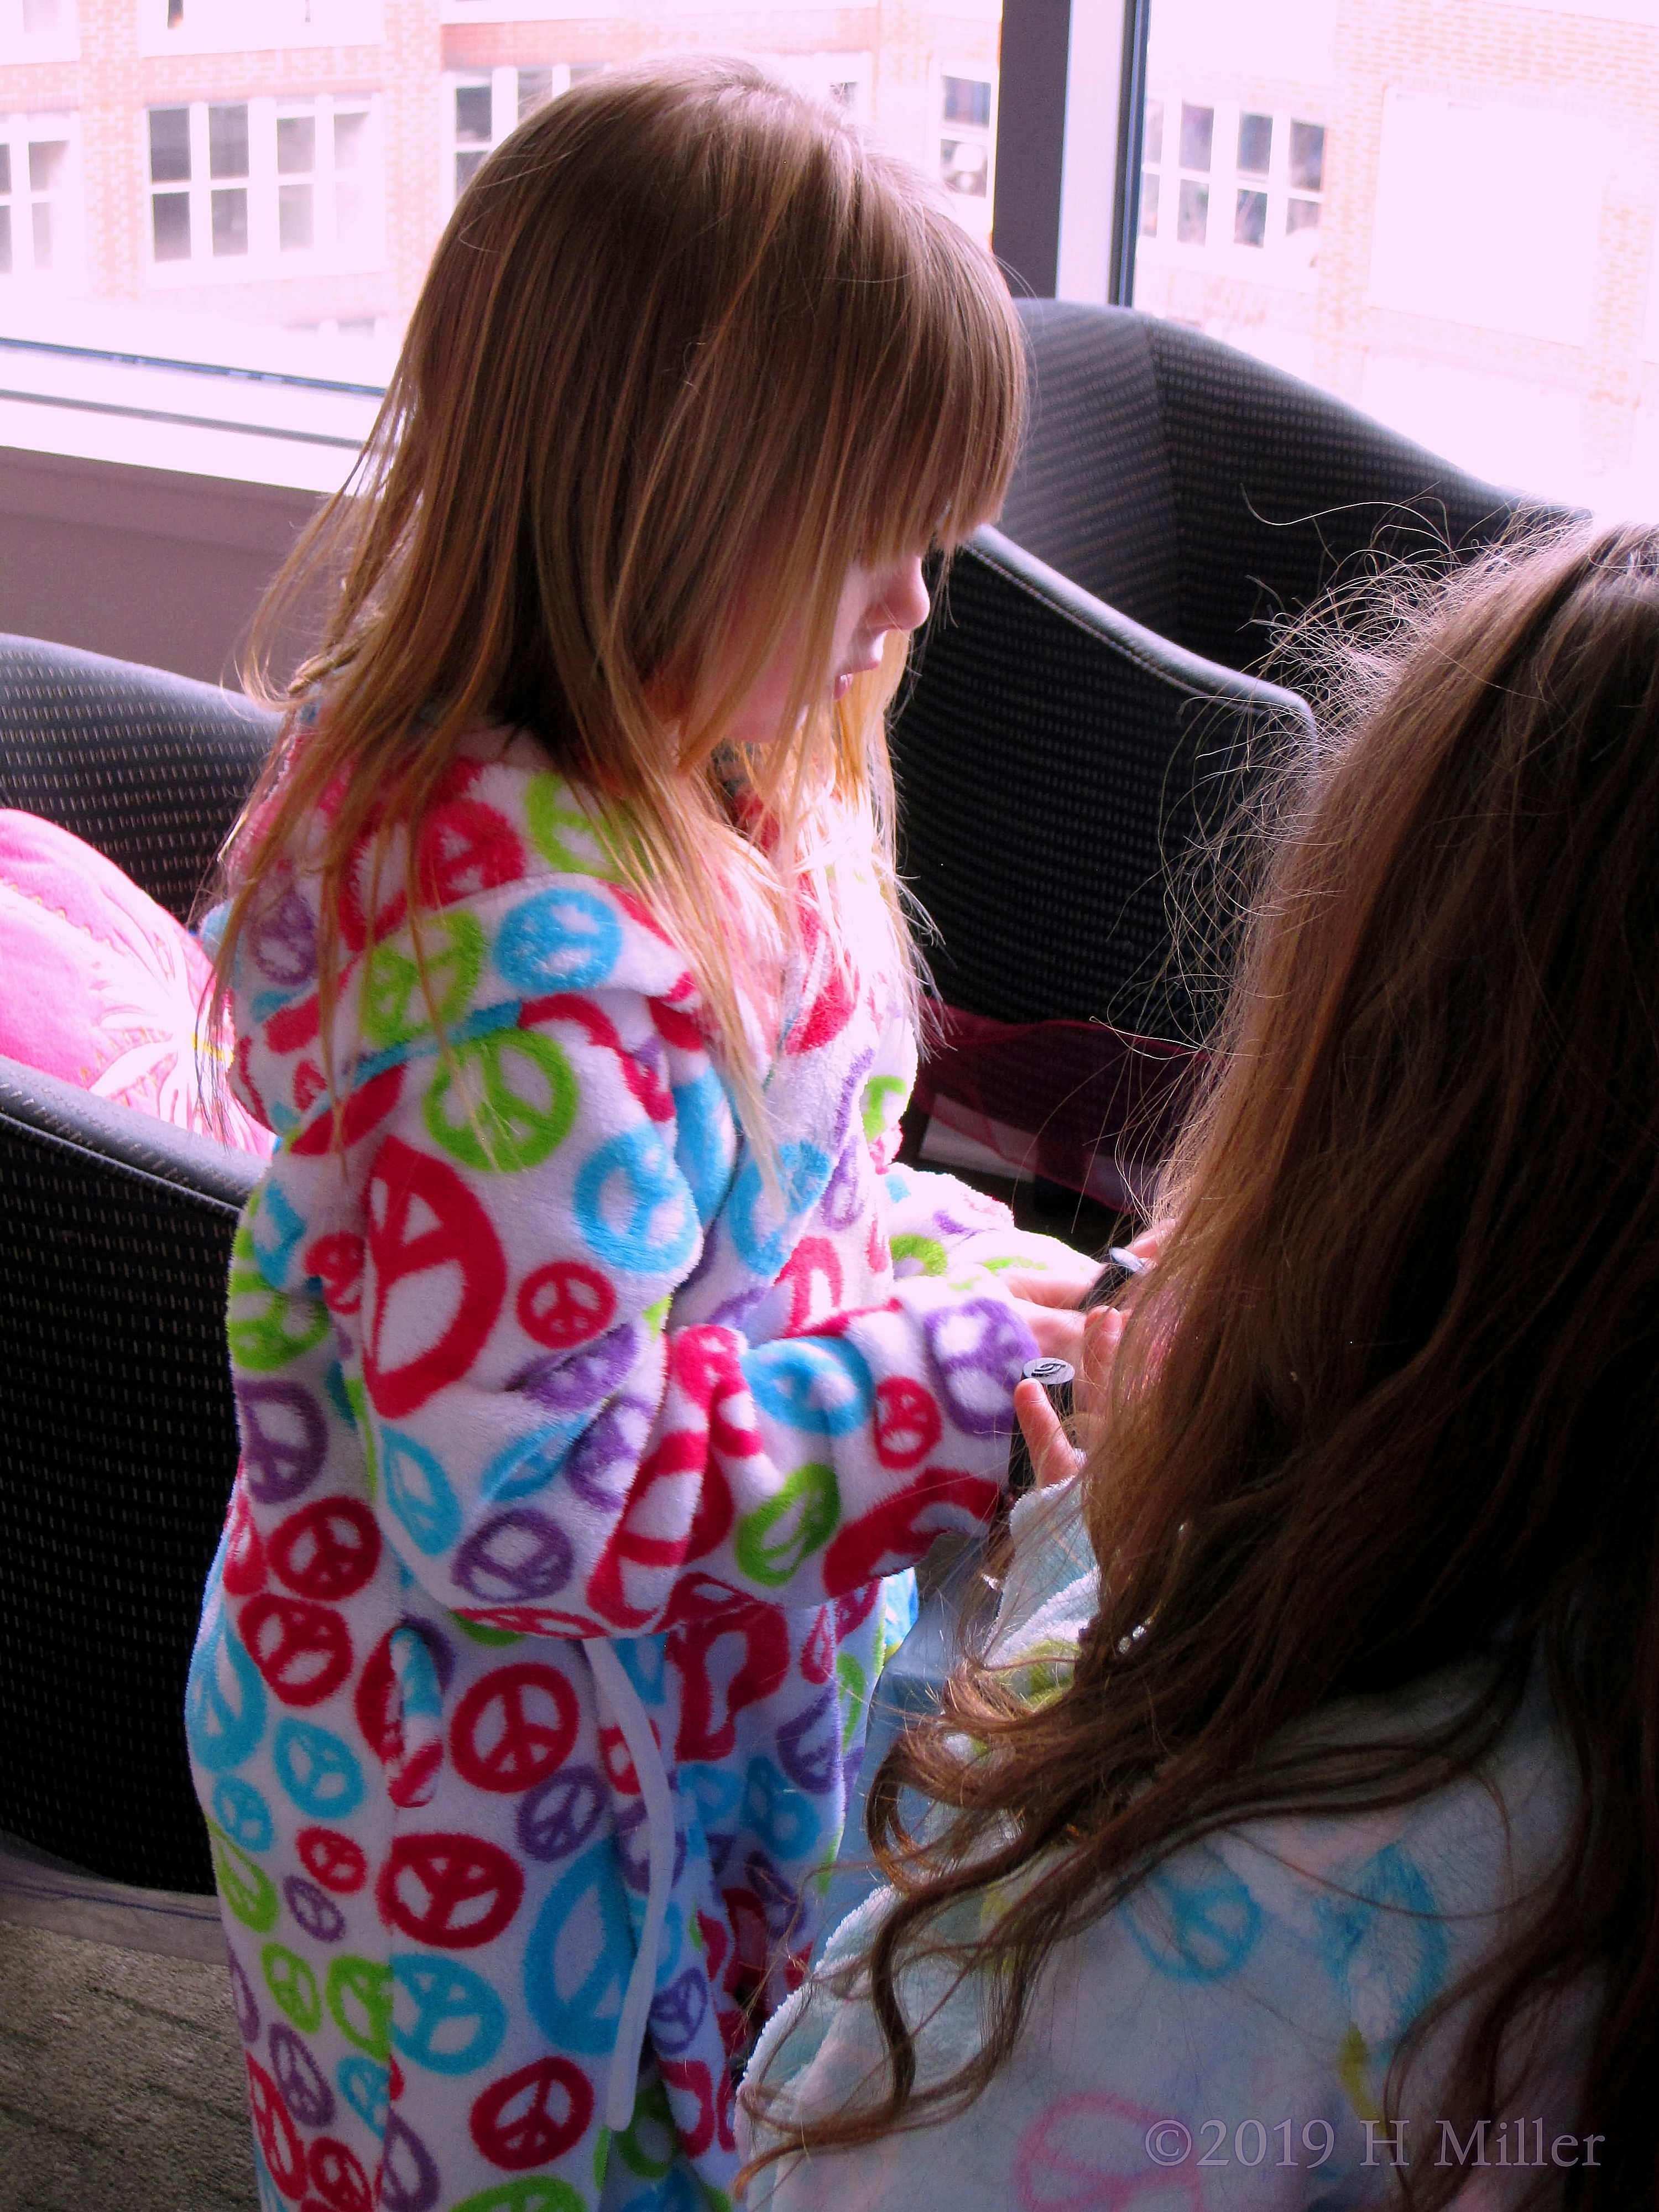 This Party Guest Has Chosen Her Favorite Kids Spa Robe!